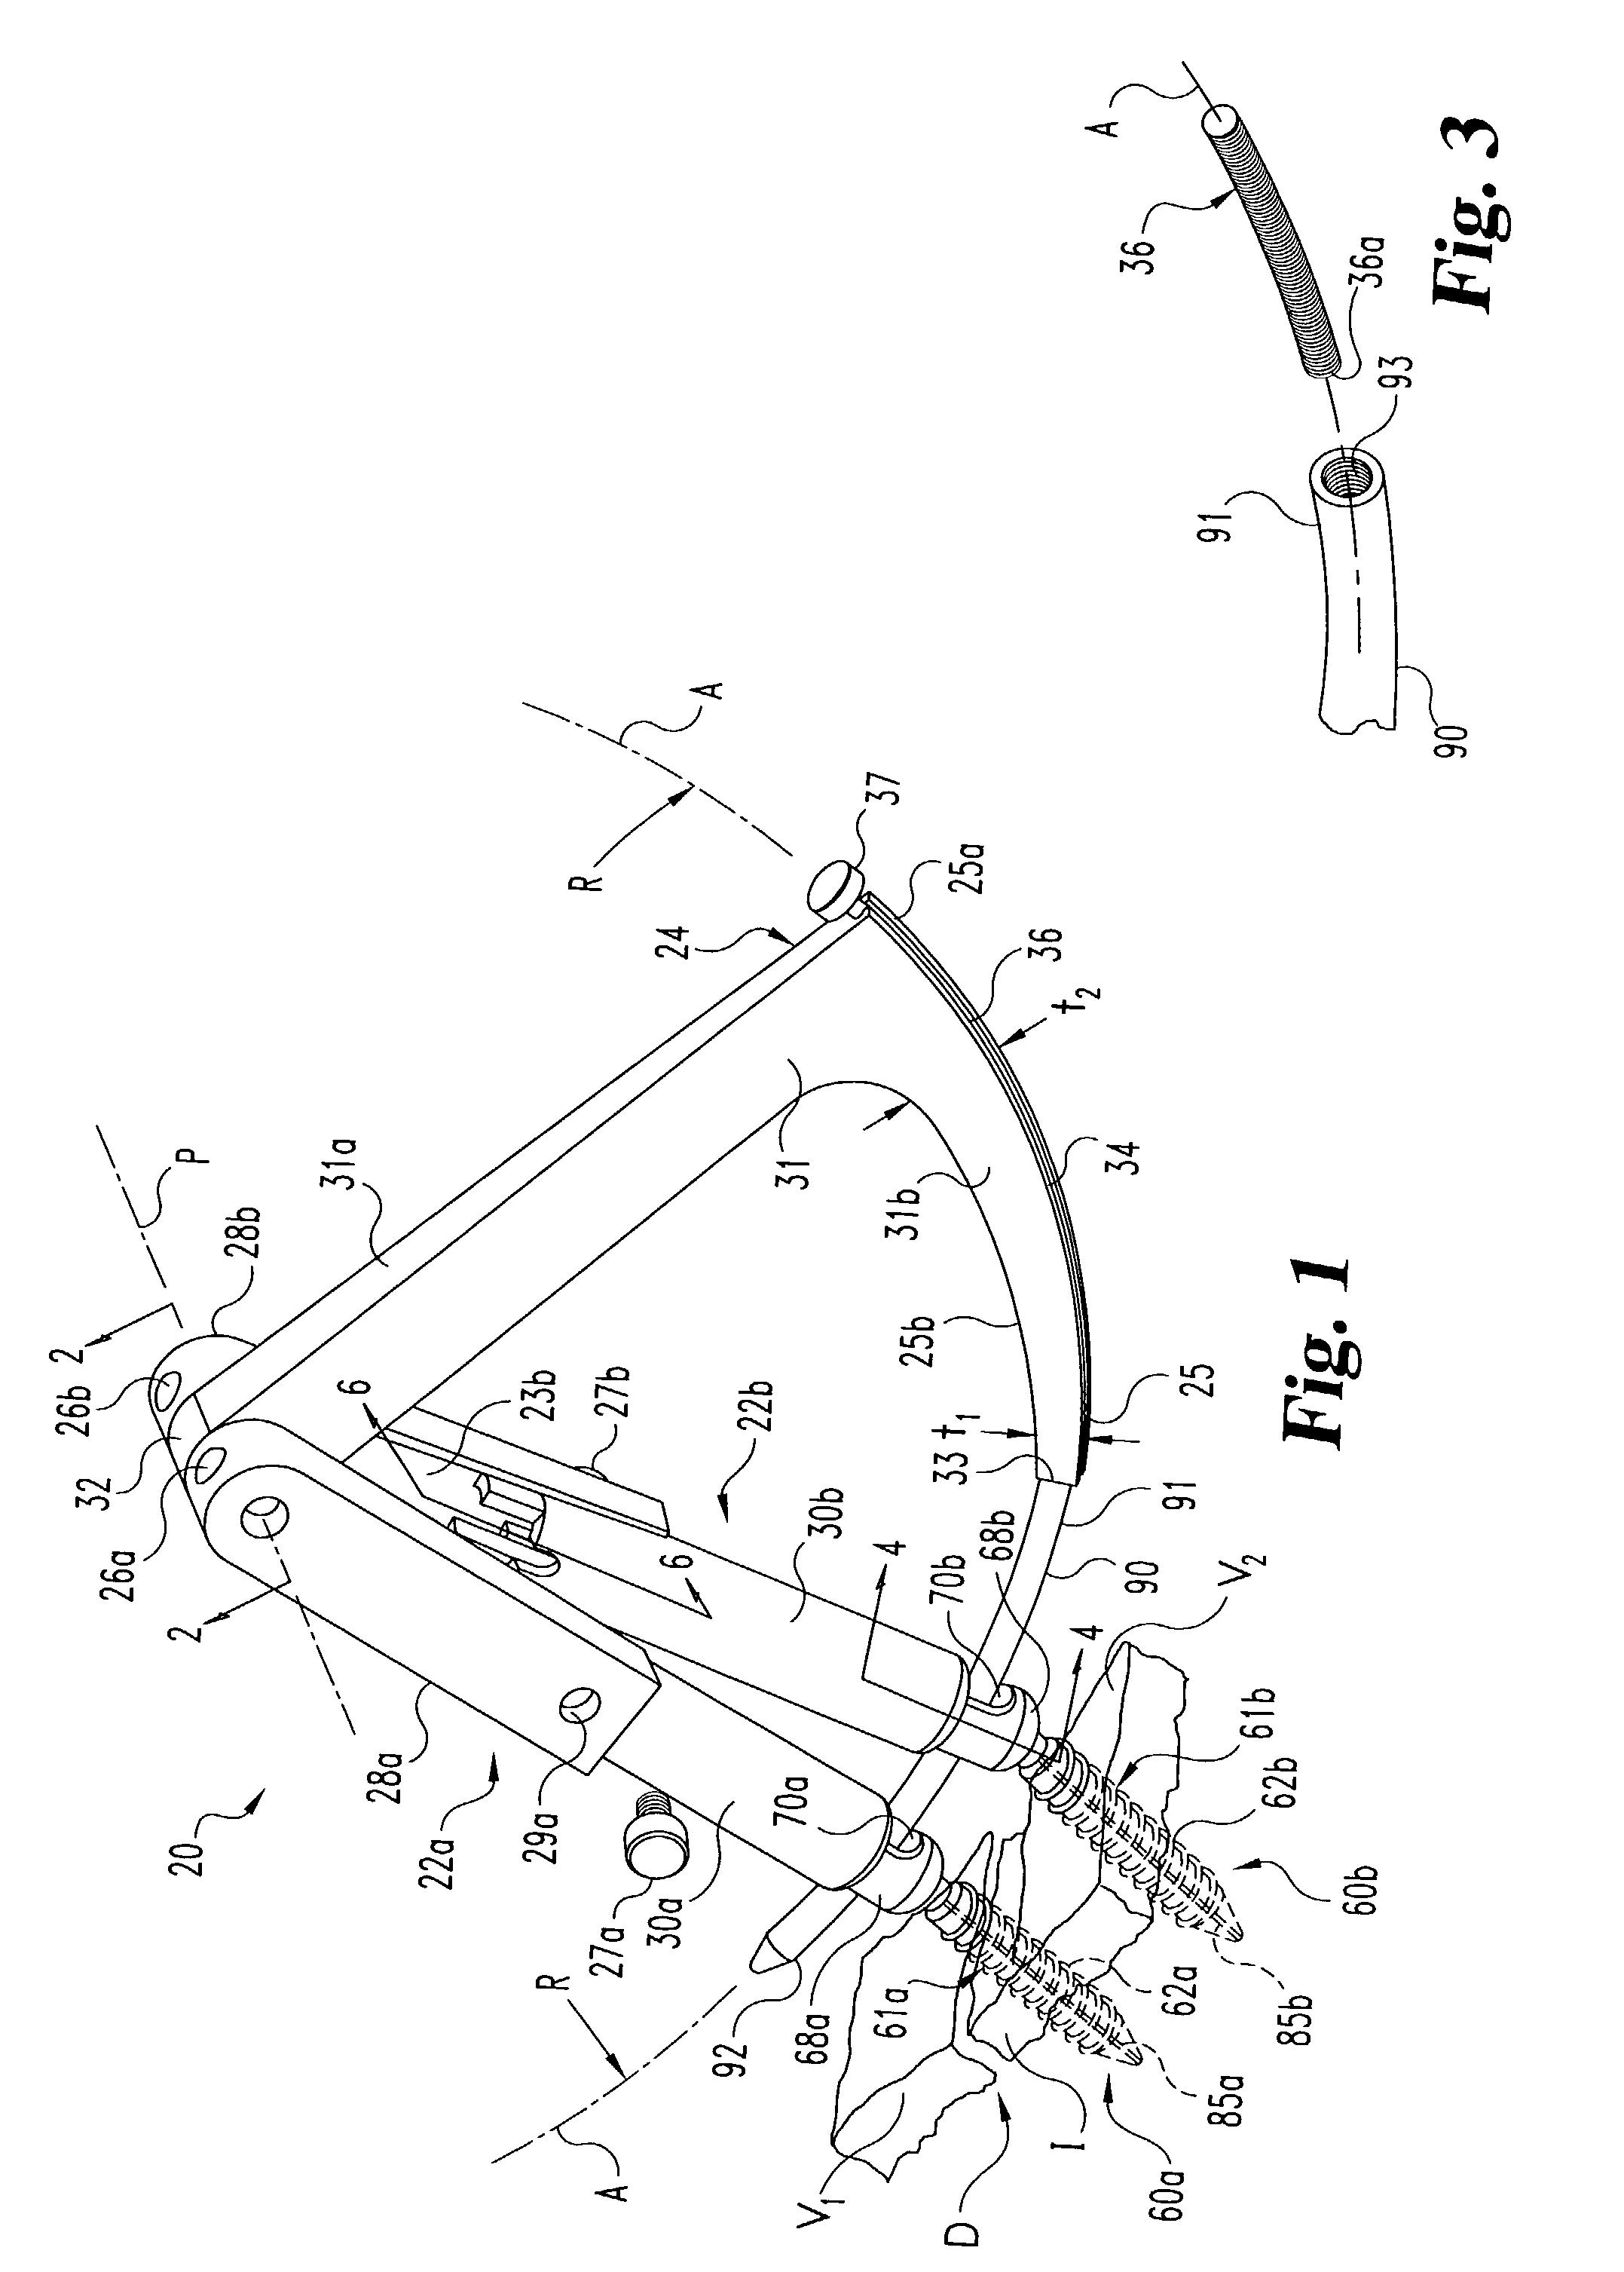 Instruments and methods for stabilization of bony structures